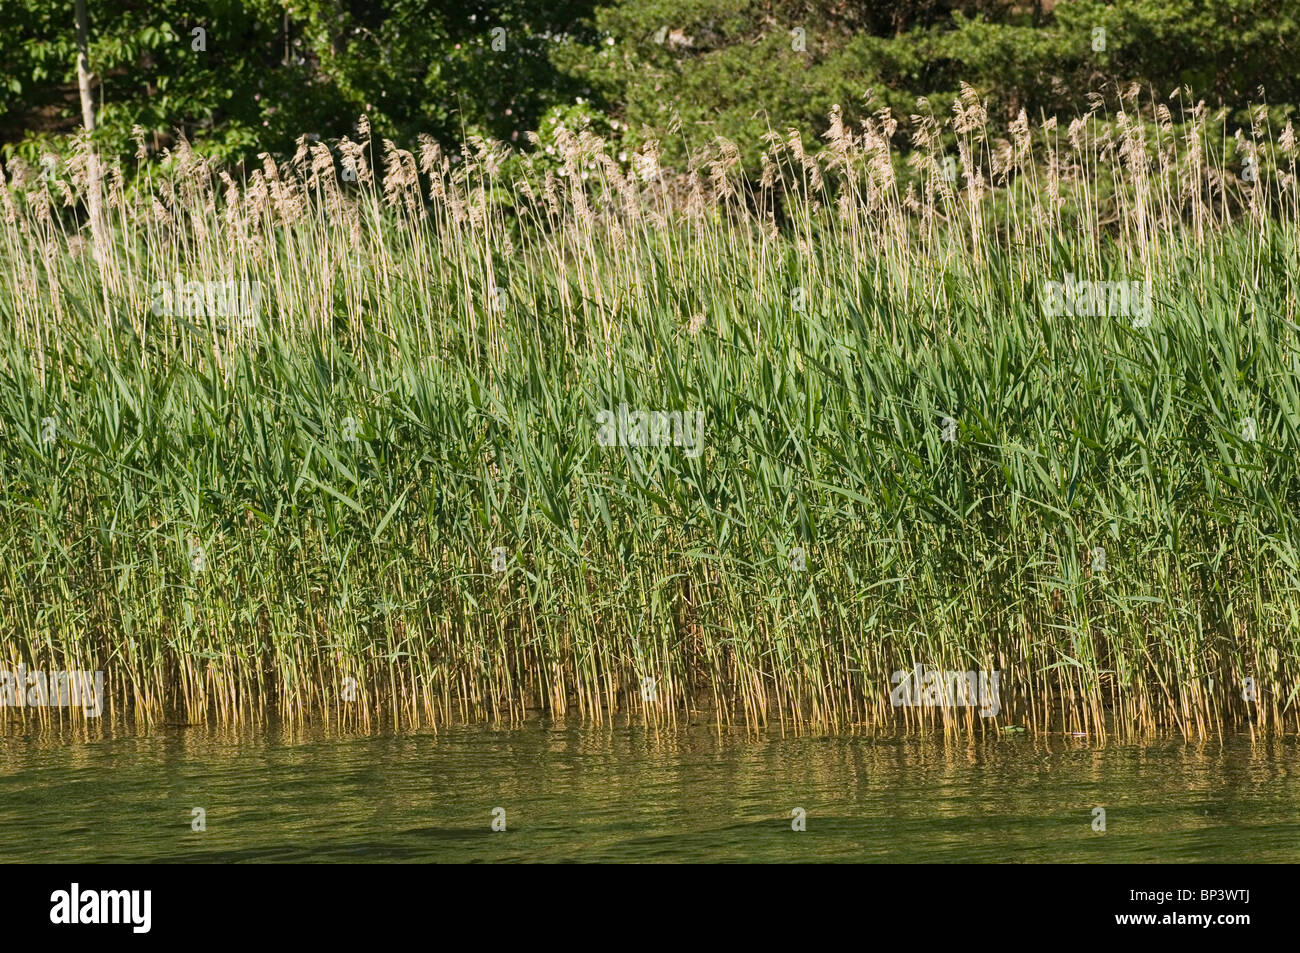 reed read bed beds natural filtration plant aquatic river lake water habitat clear clean fresh reeds reads Stock Photo